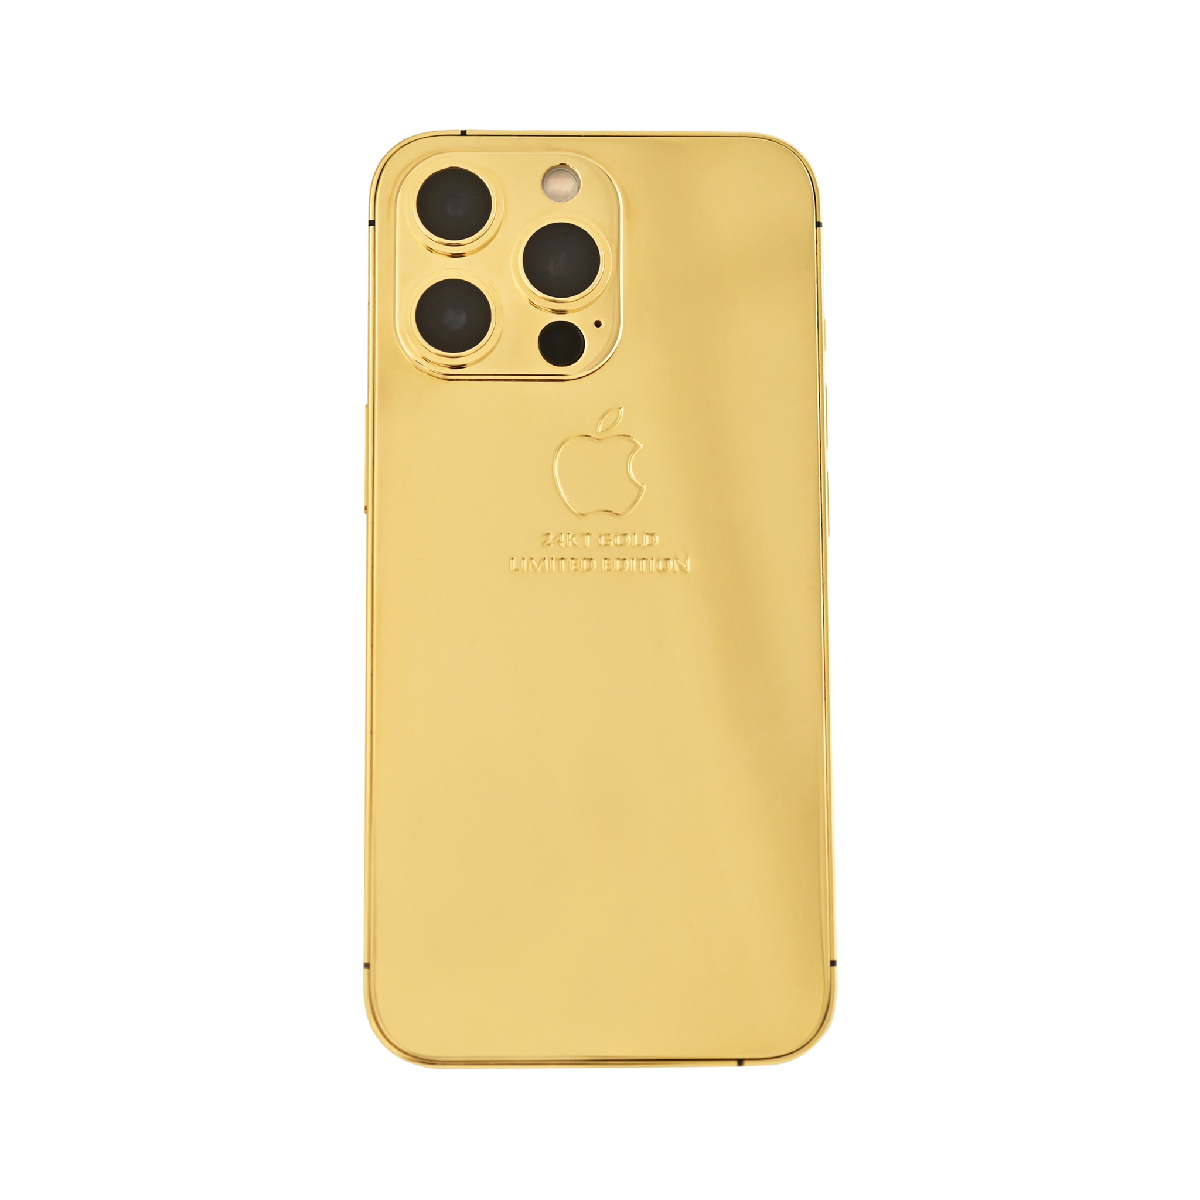 Caviar Luxury 24k Full Gold Customized iPhone 13 Pro Max 1 TB Limited Edition